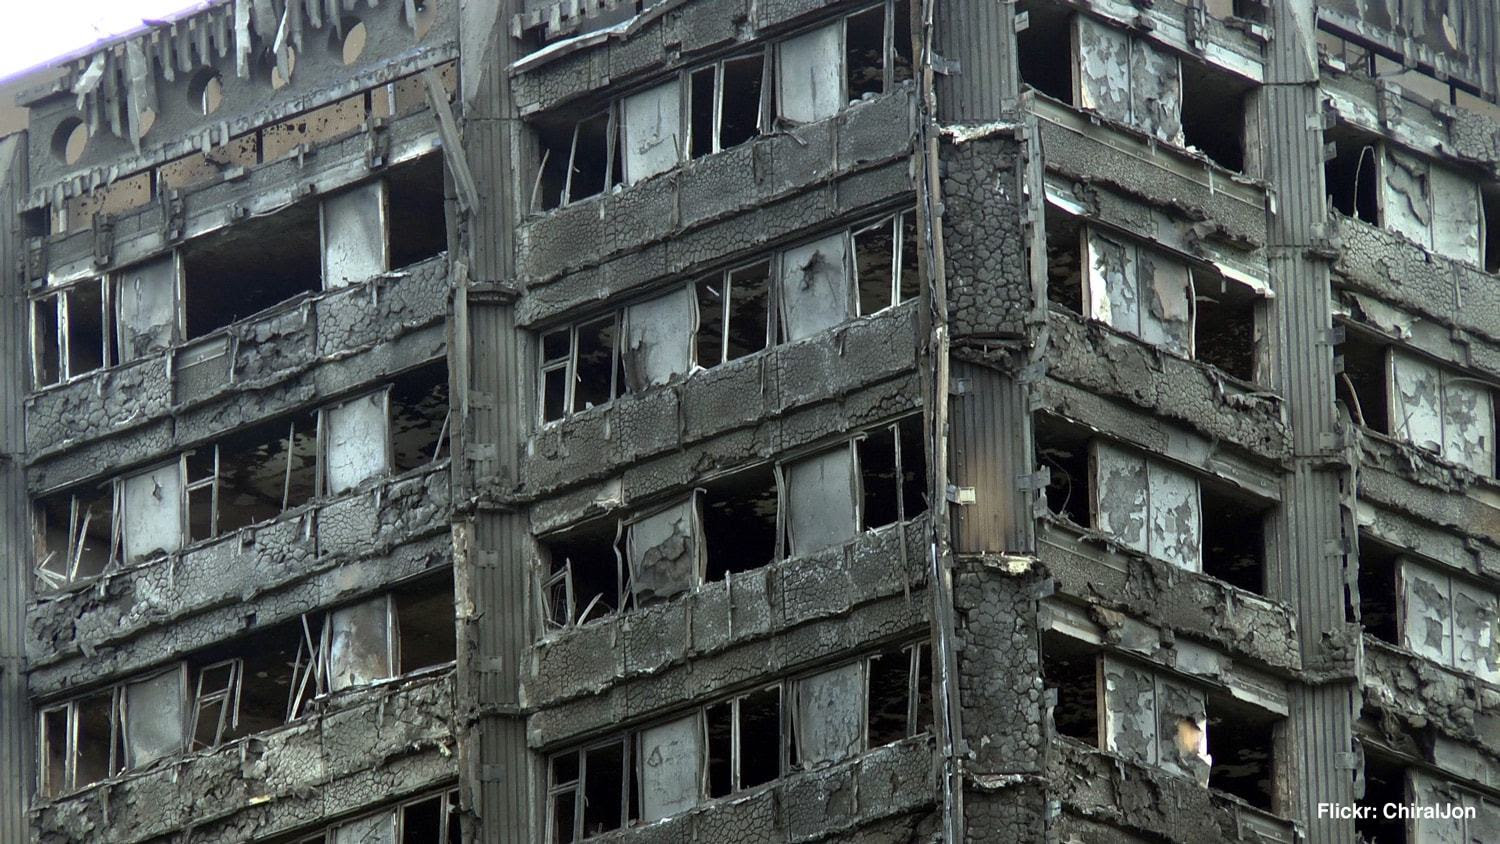 A close up of Grenfell Tower